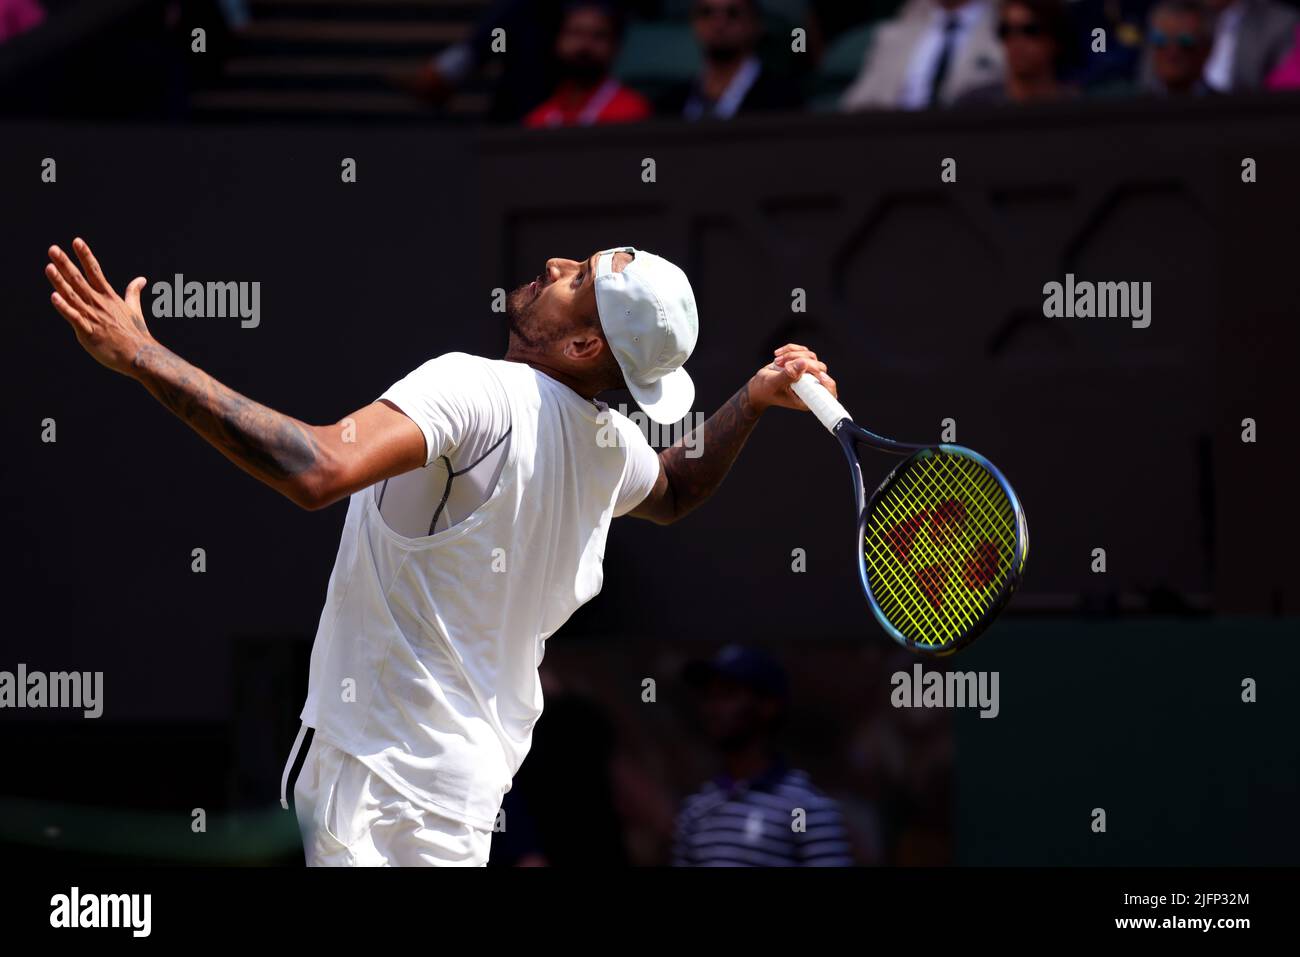 Australia's Nick Kyrigos serving to American Brandon Nakashima during their fourth round match on Center Court today at Wimbledon. Kyrgios won the match in five sets. Credit: Adam Stoltman/Alamy Live News Stock Photo